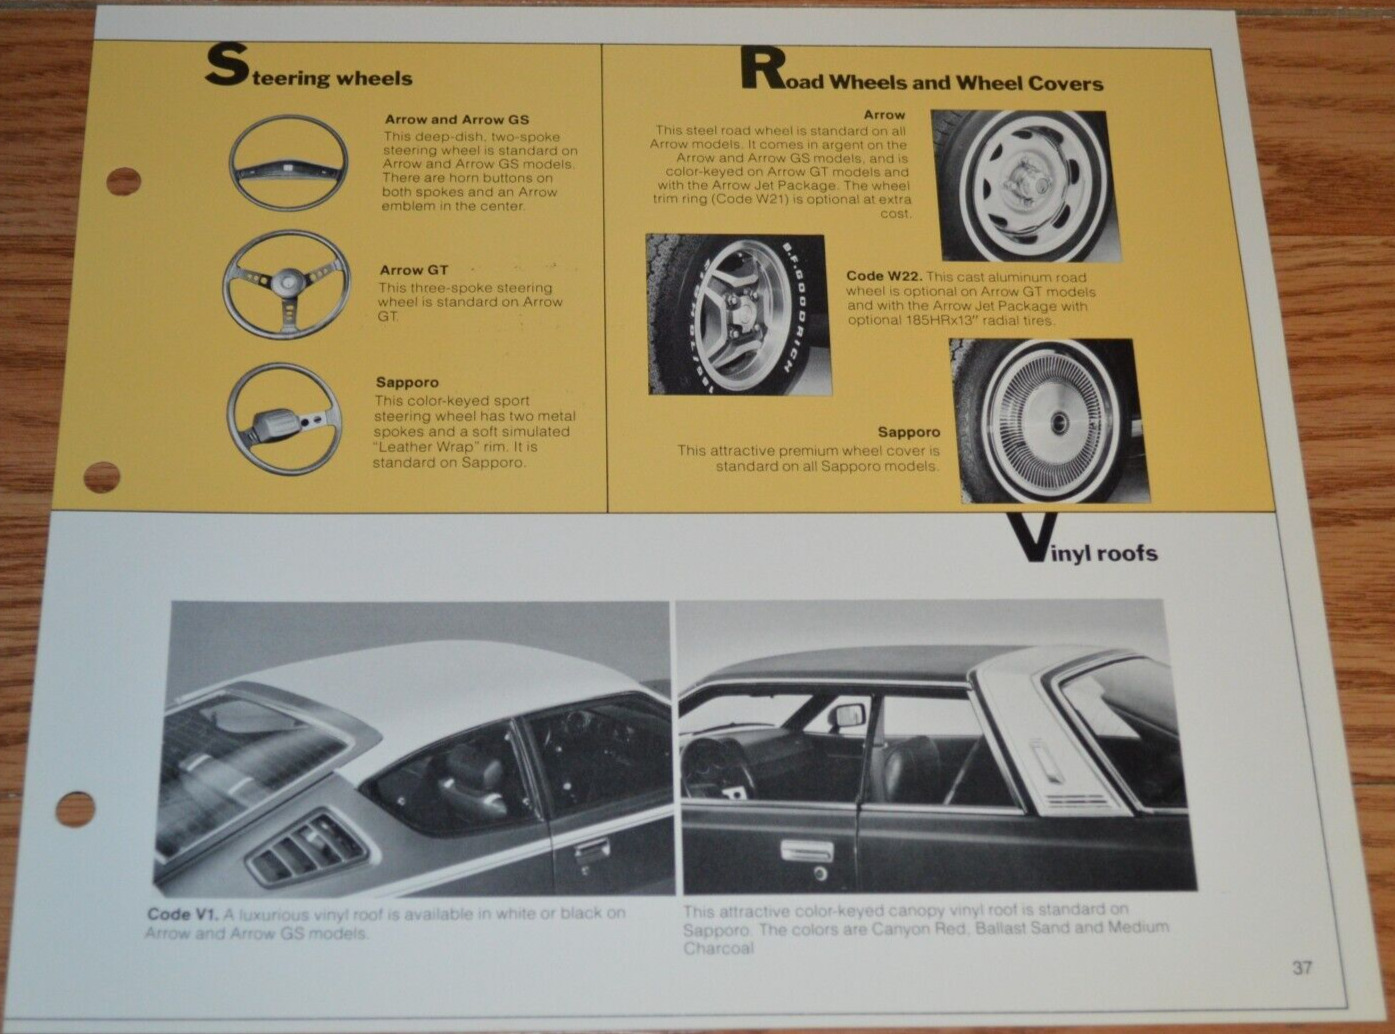 ★1978 PLYMOUTH ARROW GT / SAPPORO VINYL TOP-RIMS OPTIONS DEALER ONLY INFORMATION